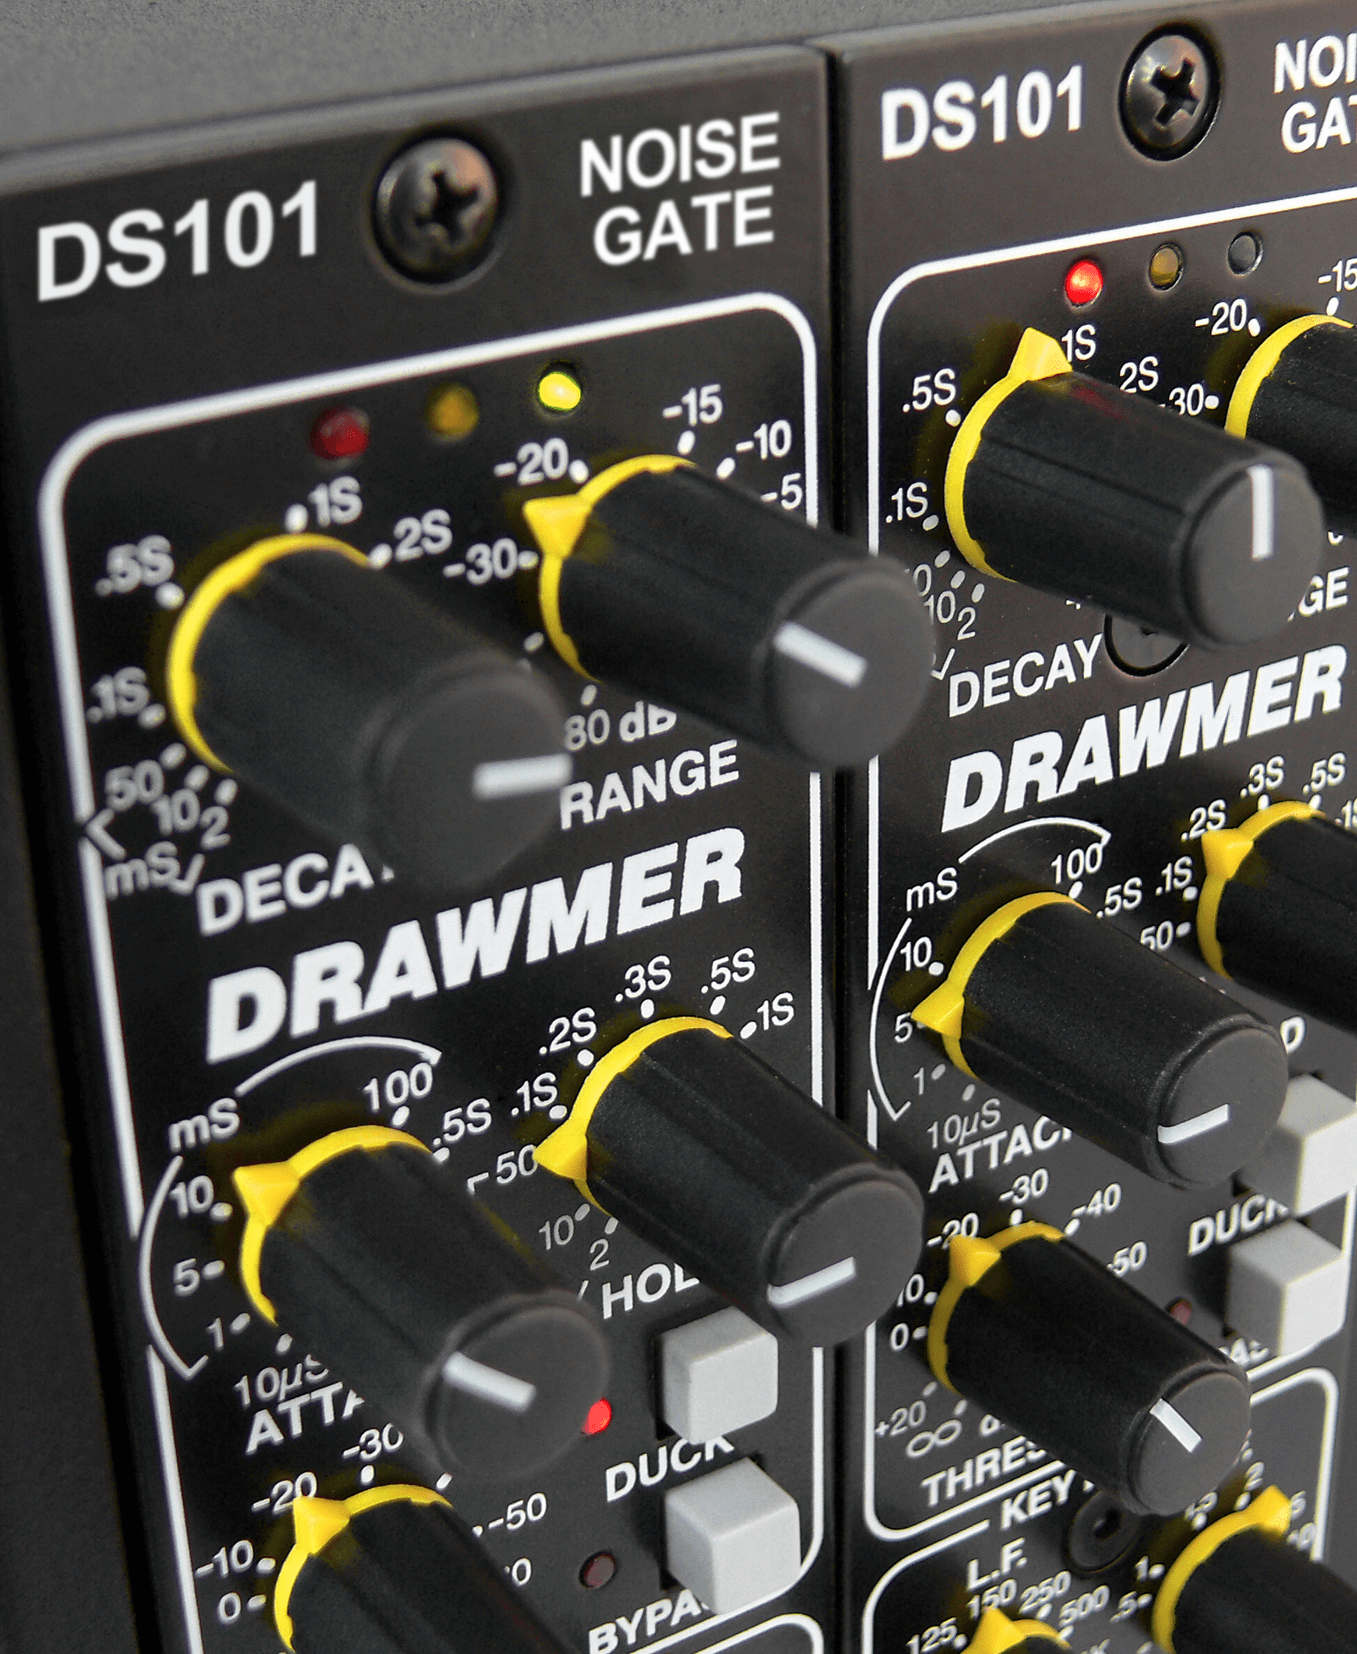 A very close up image of the DS101